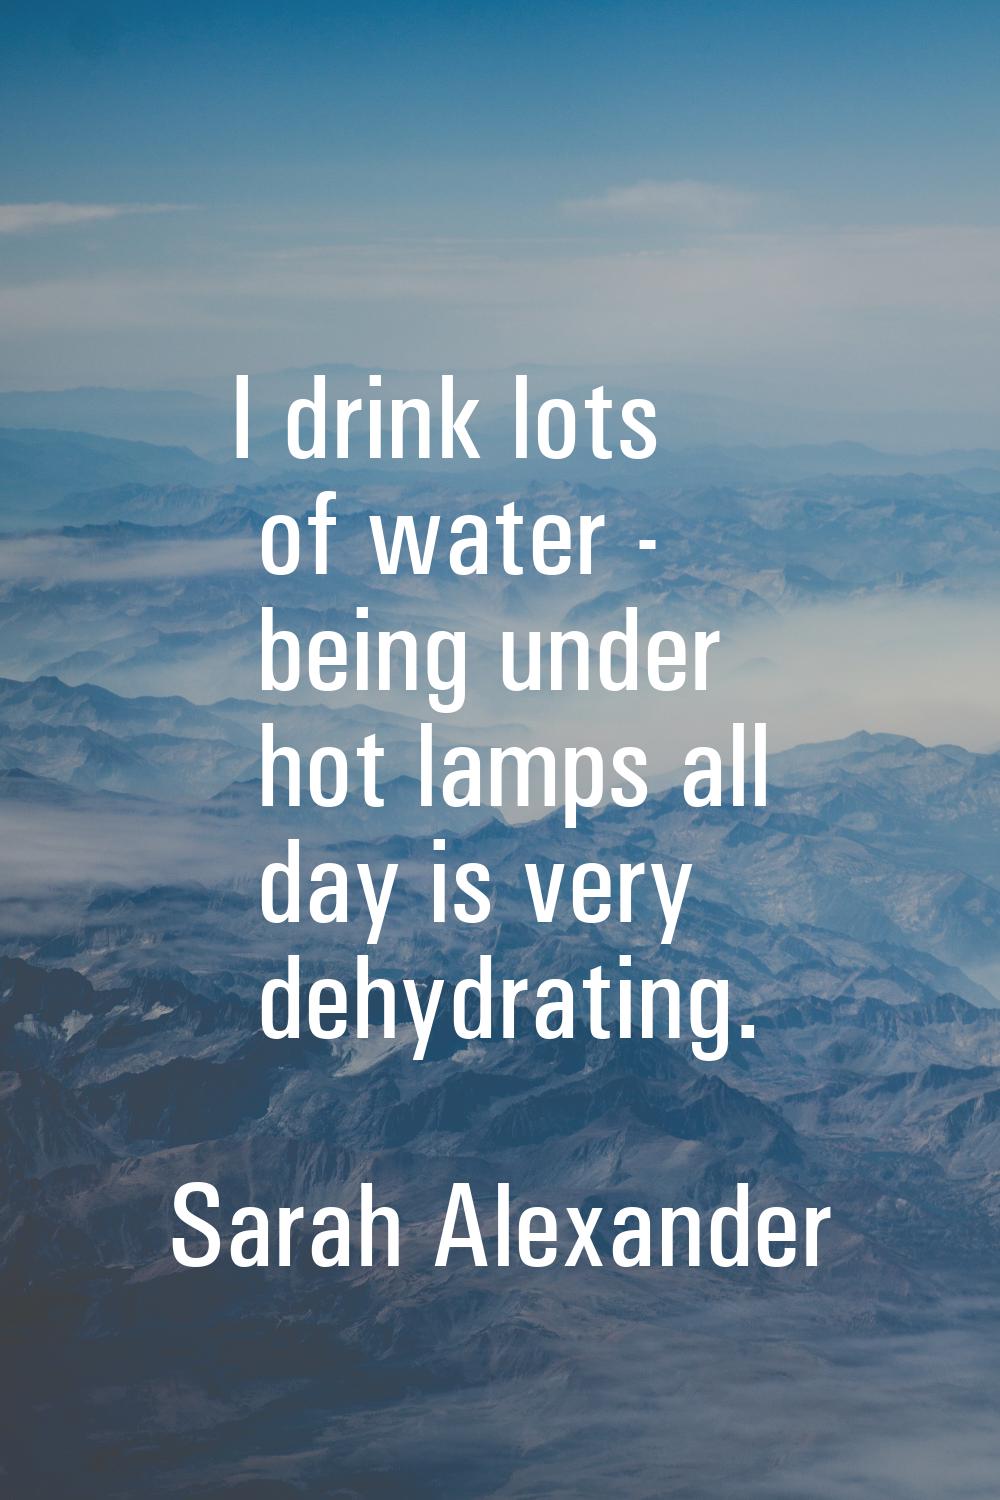 I drink lots of water - being under hot lamps all day is very dehydrating.